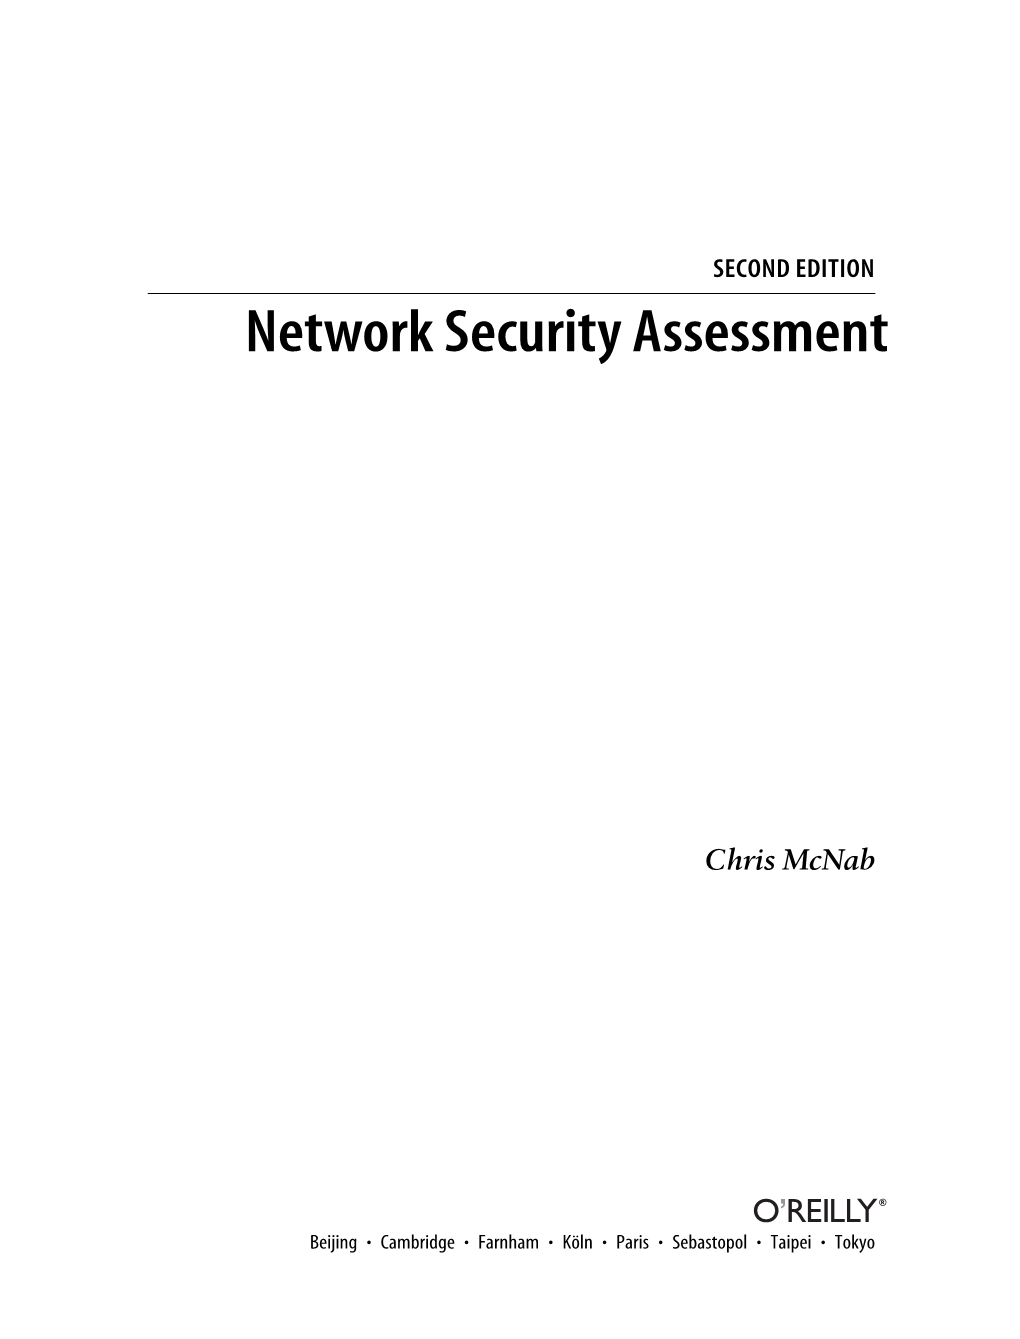 O'reilly Network Security Assessment